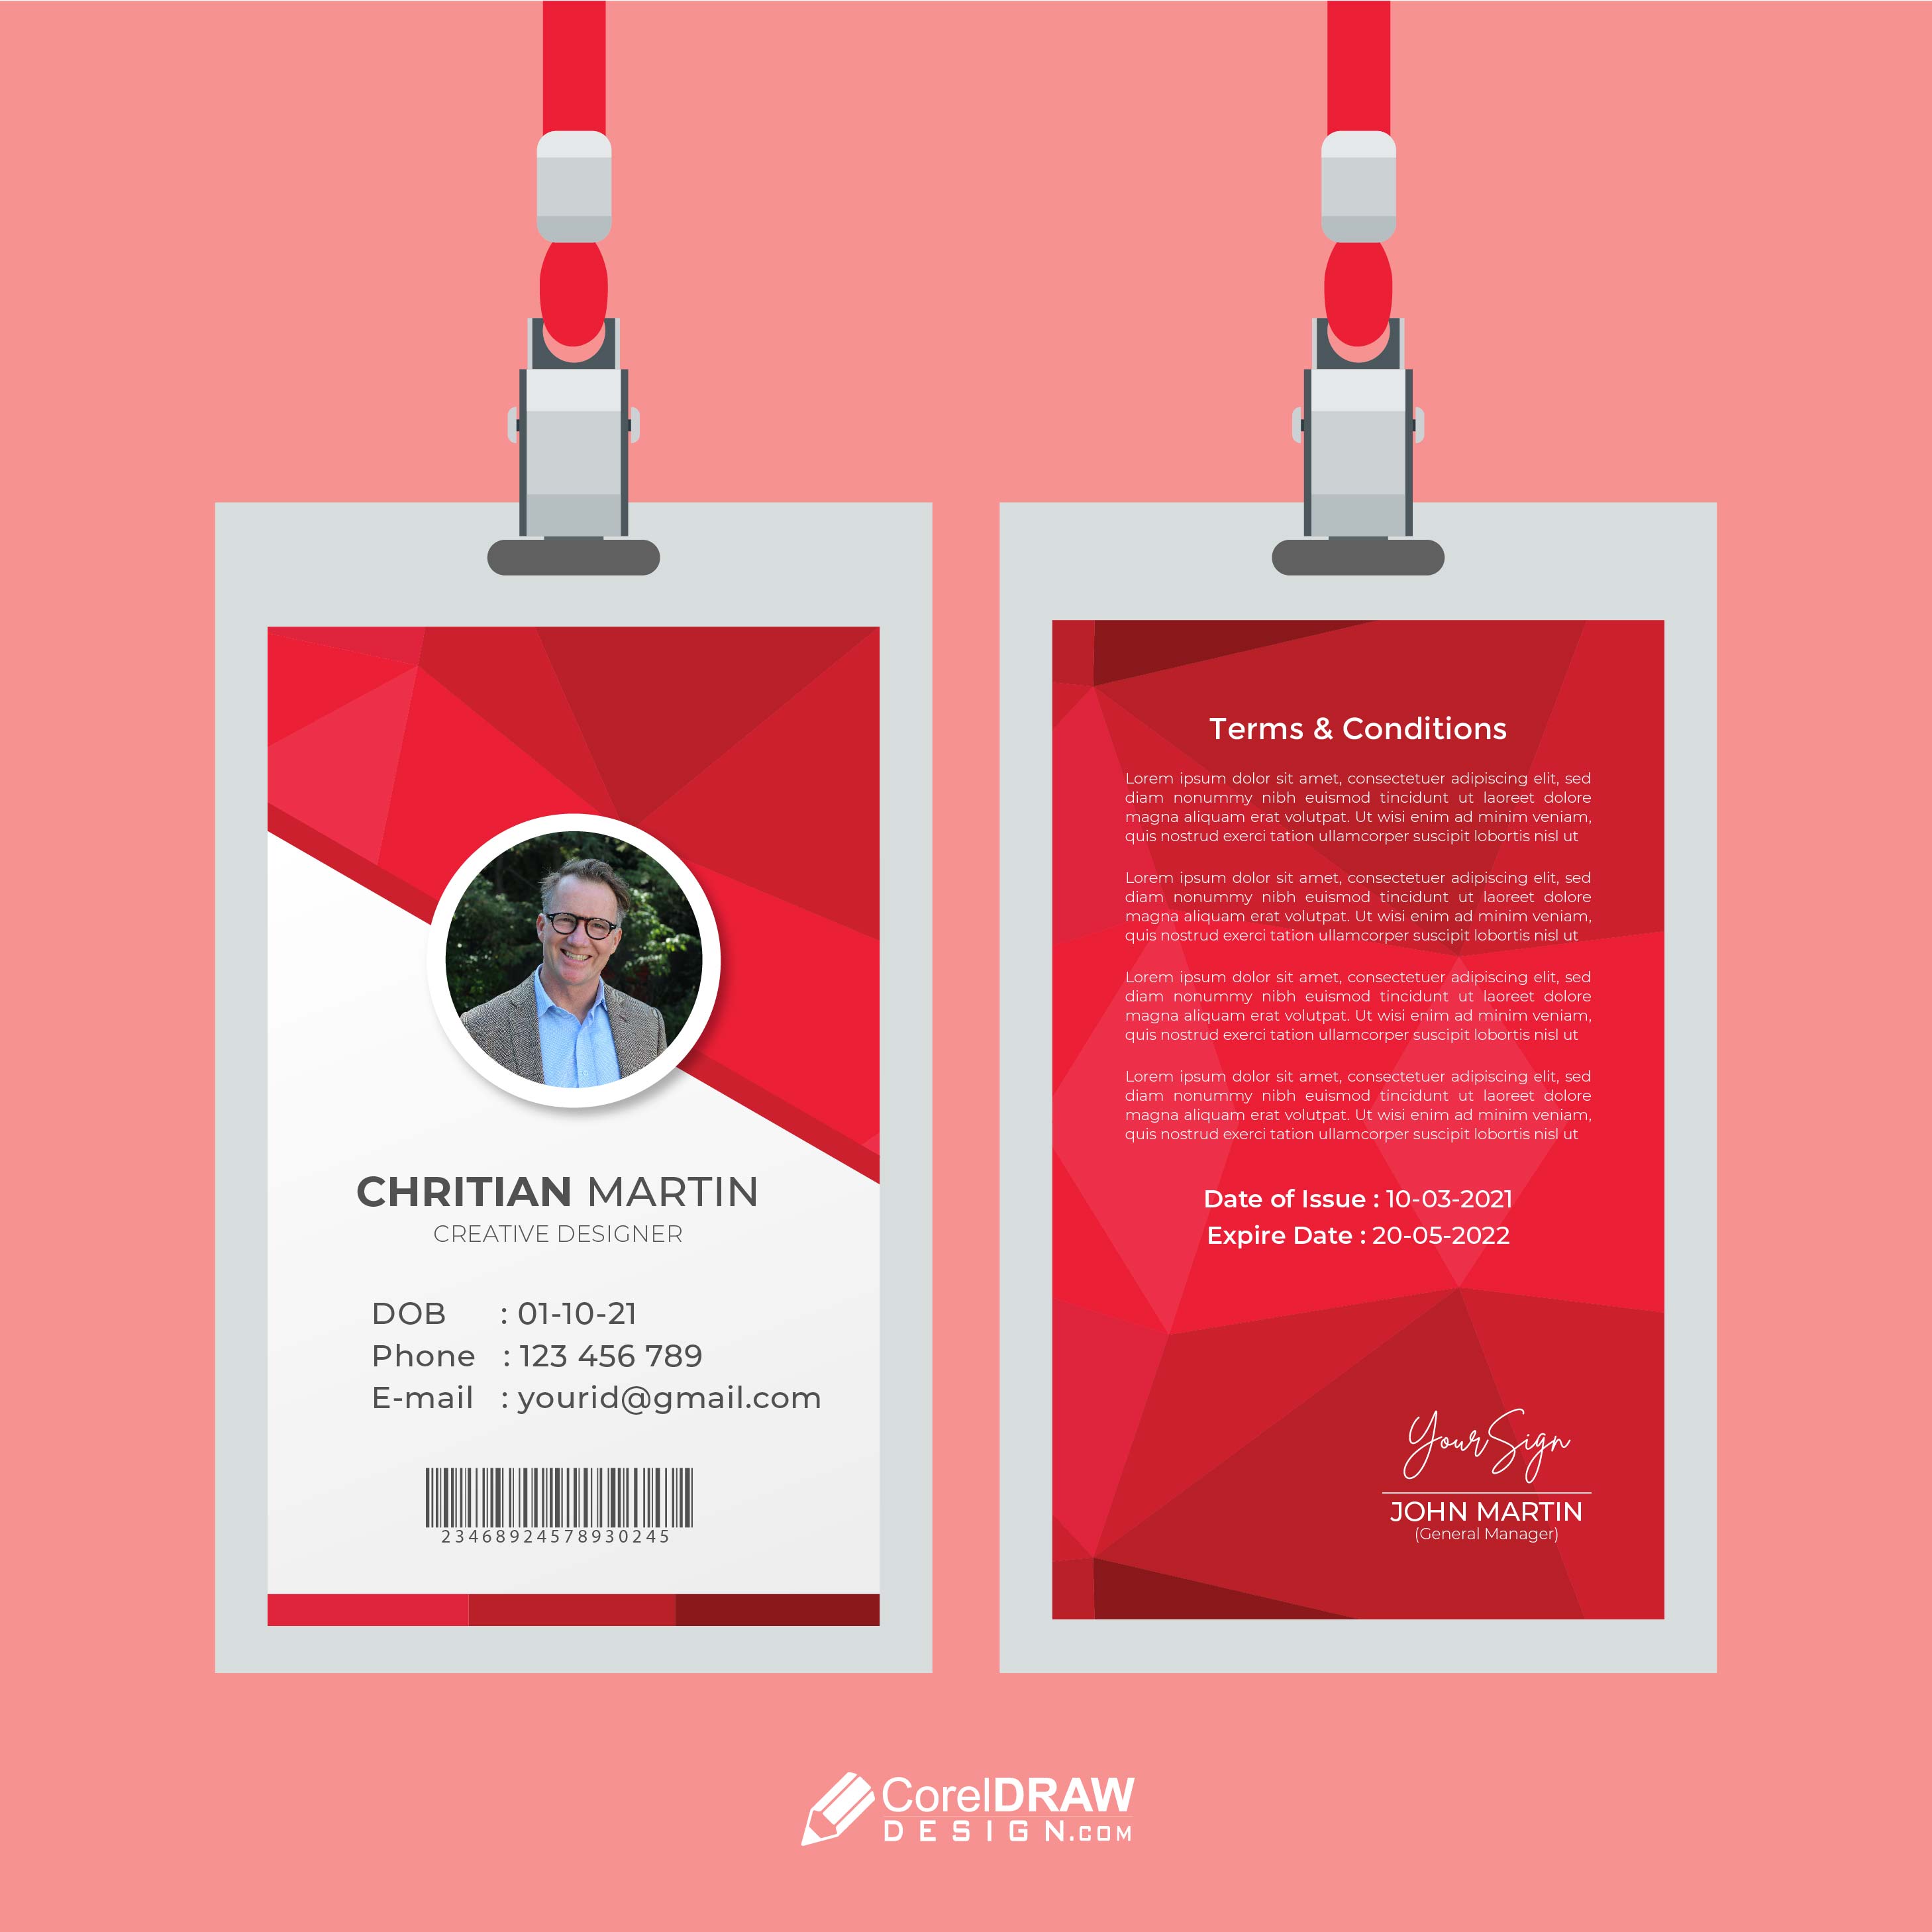 Download Abstract Corporate ID Card Template CorelDraw Design Download Free CDR Vector